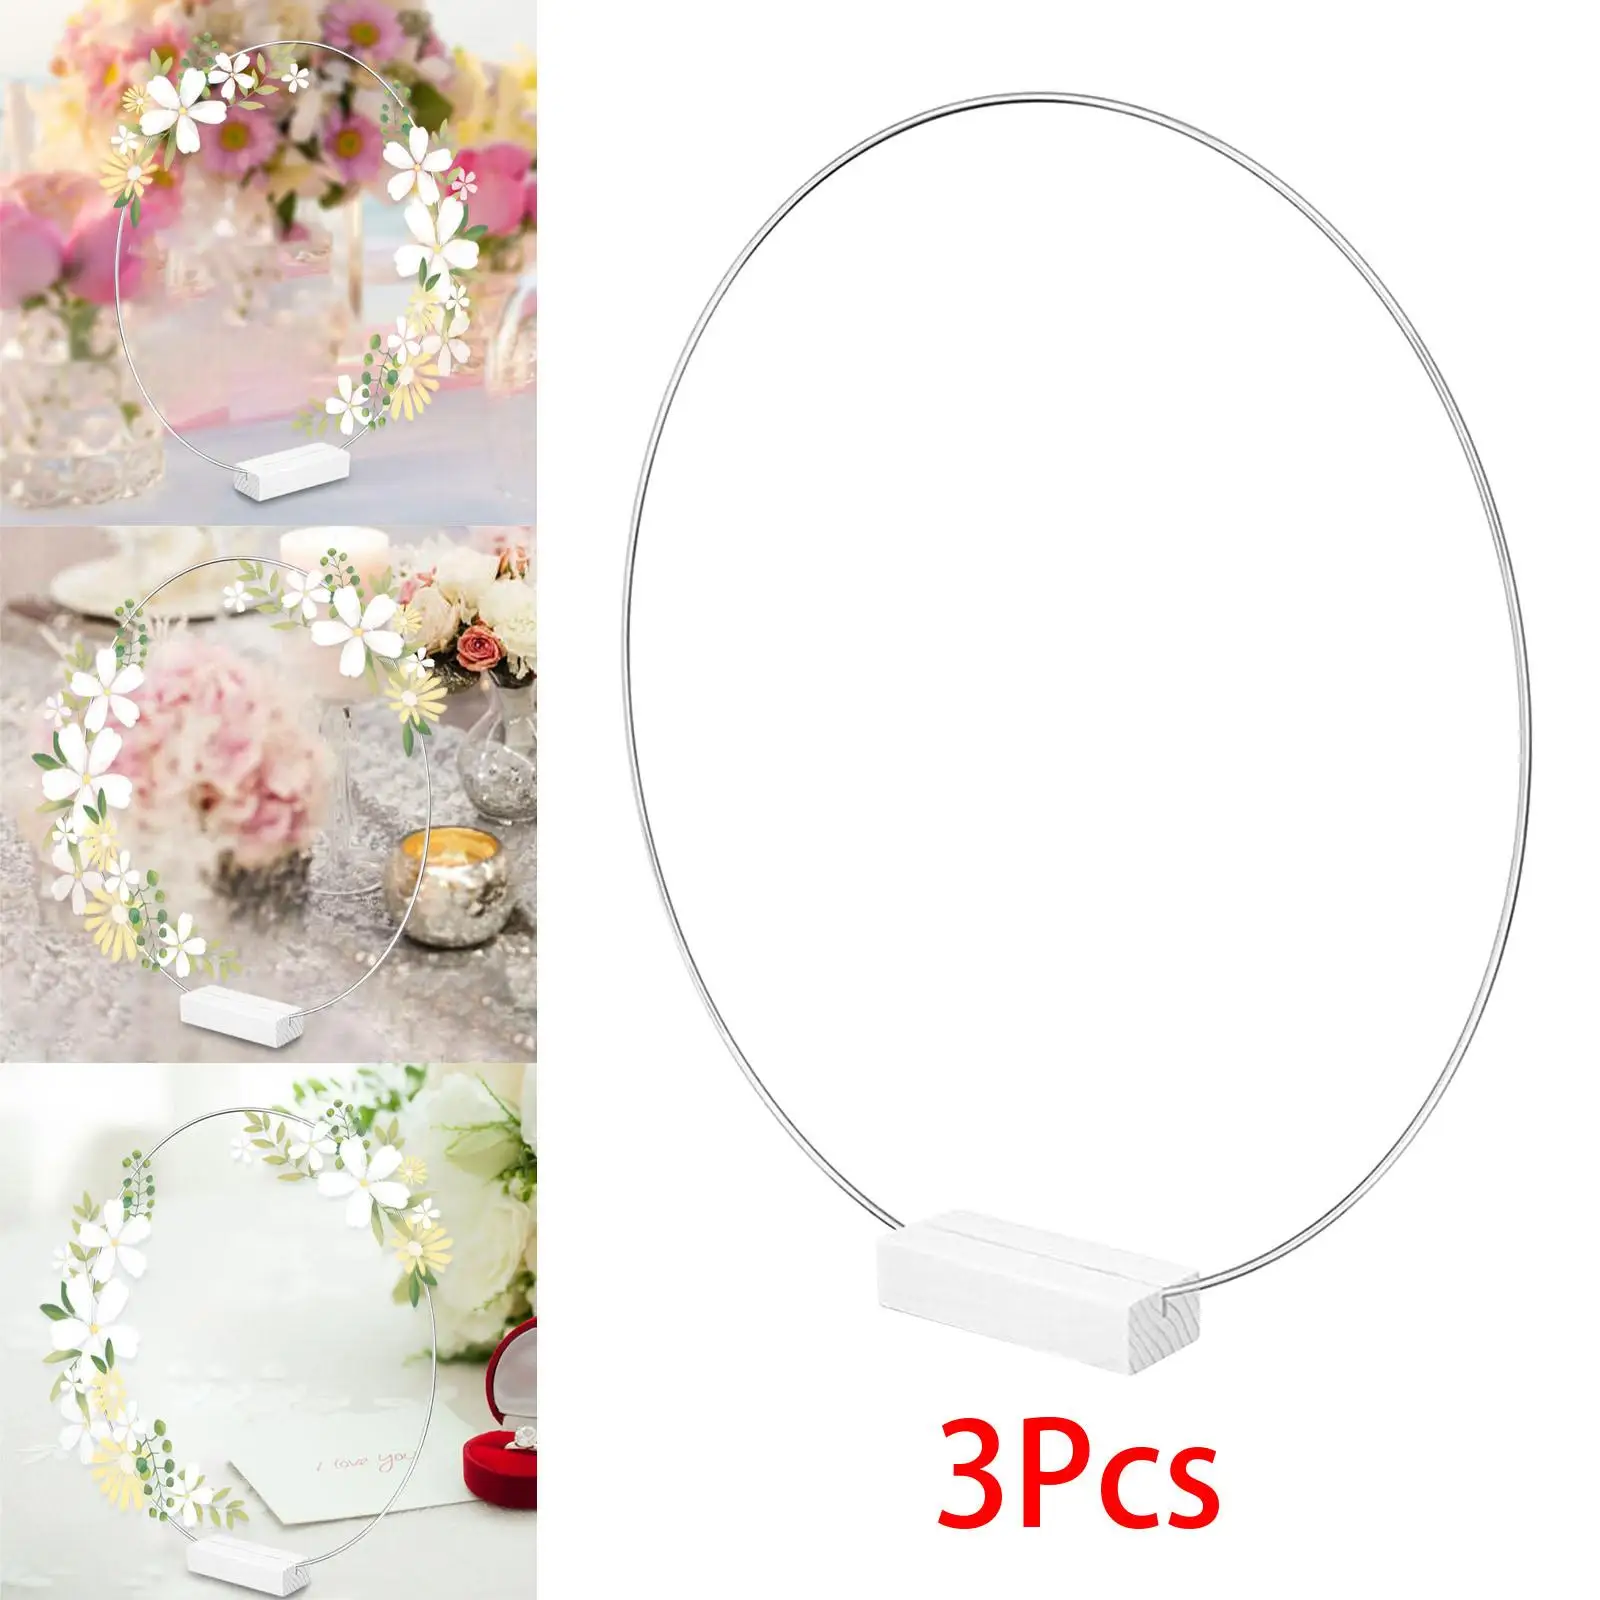 3x 30cm DIY Hoops Flower Wreath Garland Rings DIY Arts and Crafts Dream Catcher Making Metal Crafts Rings for Wedding Decoration